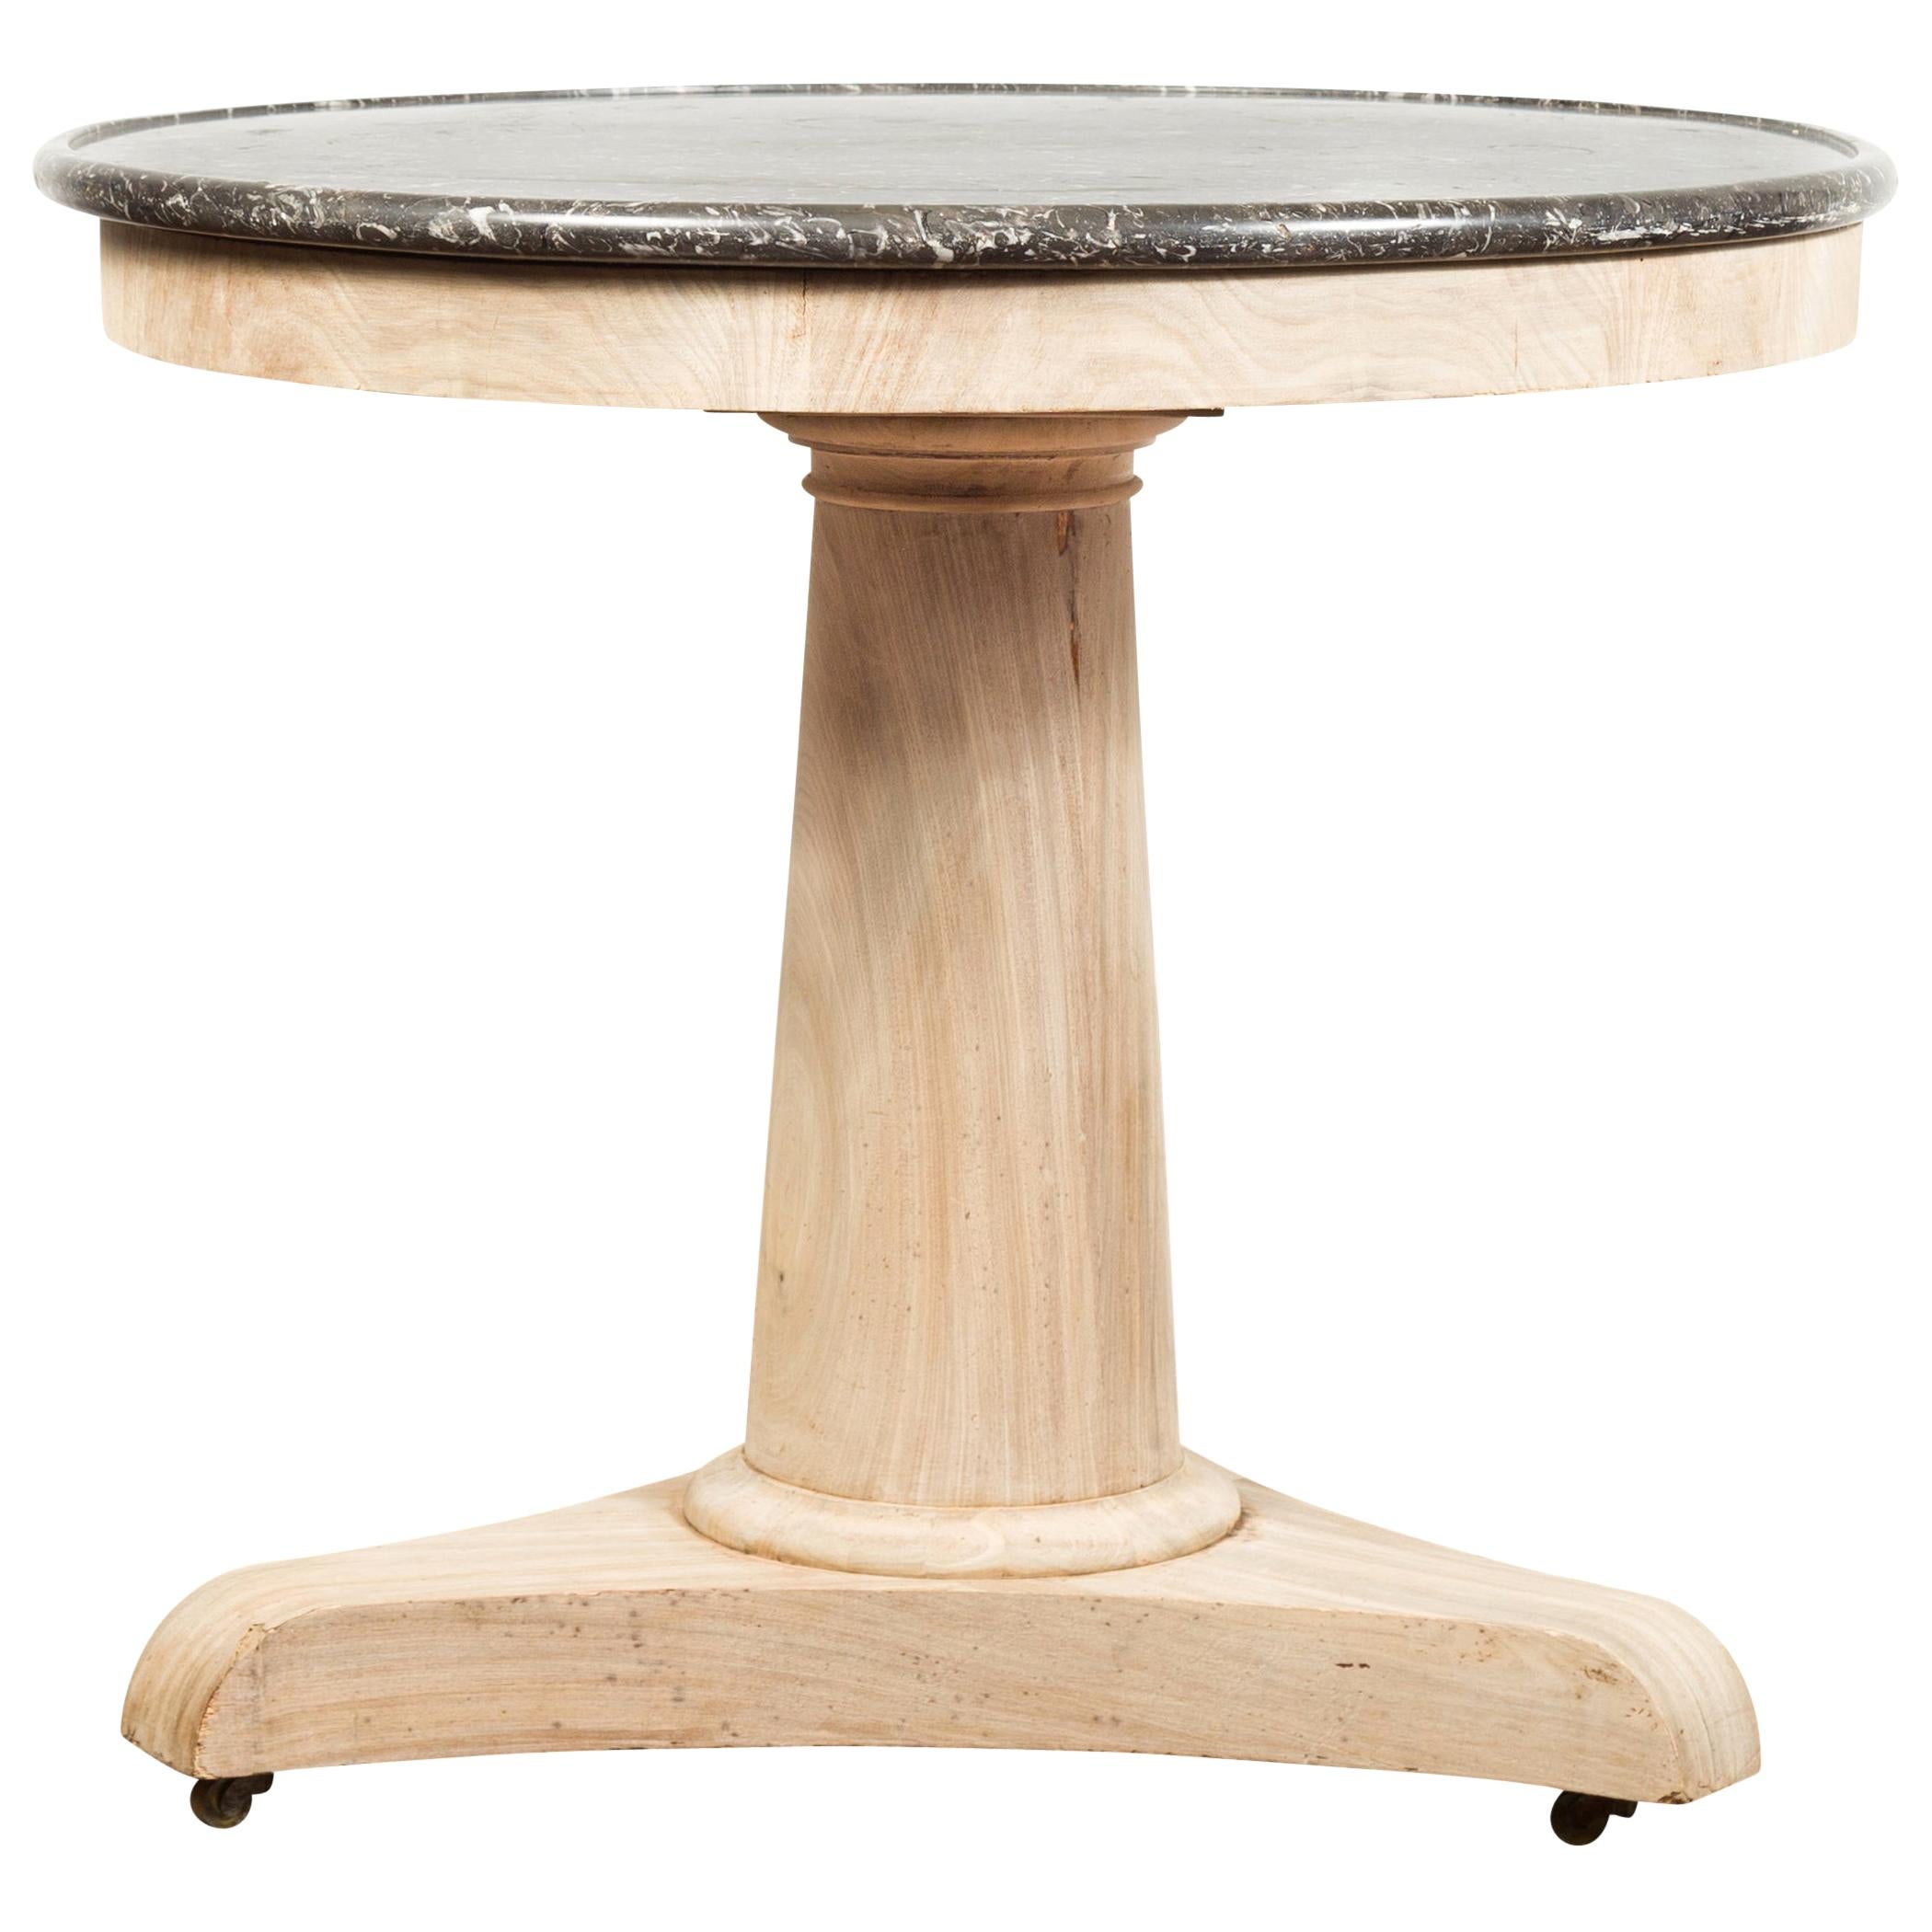 French 1870s Empire Style Bleached Walnut Side Table with Round Grey Marble Top